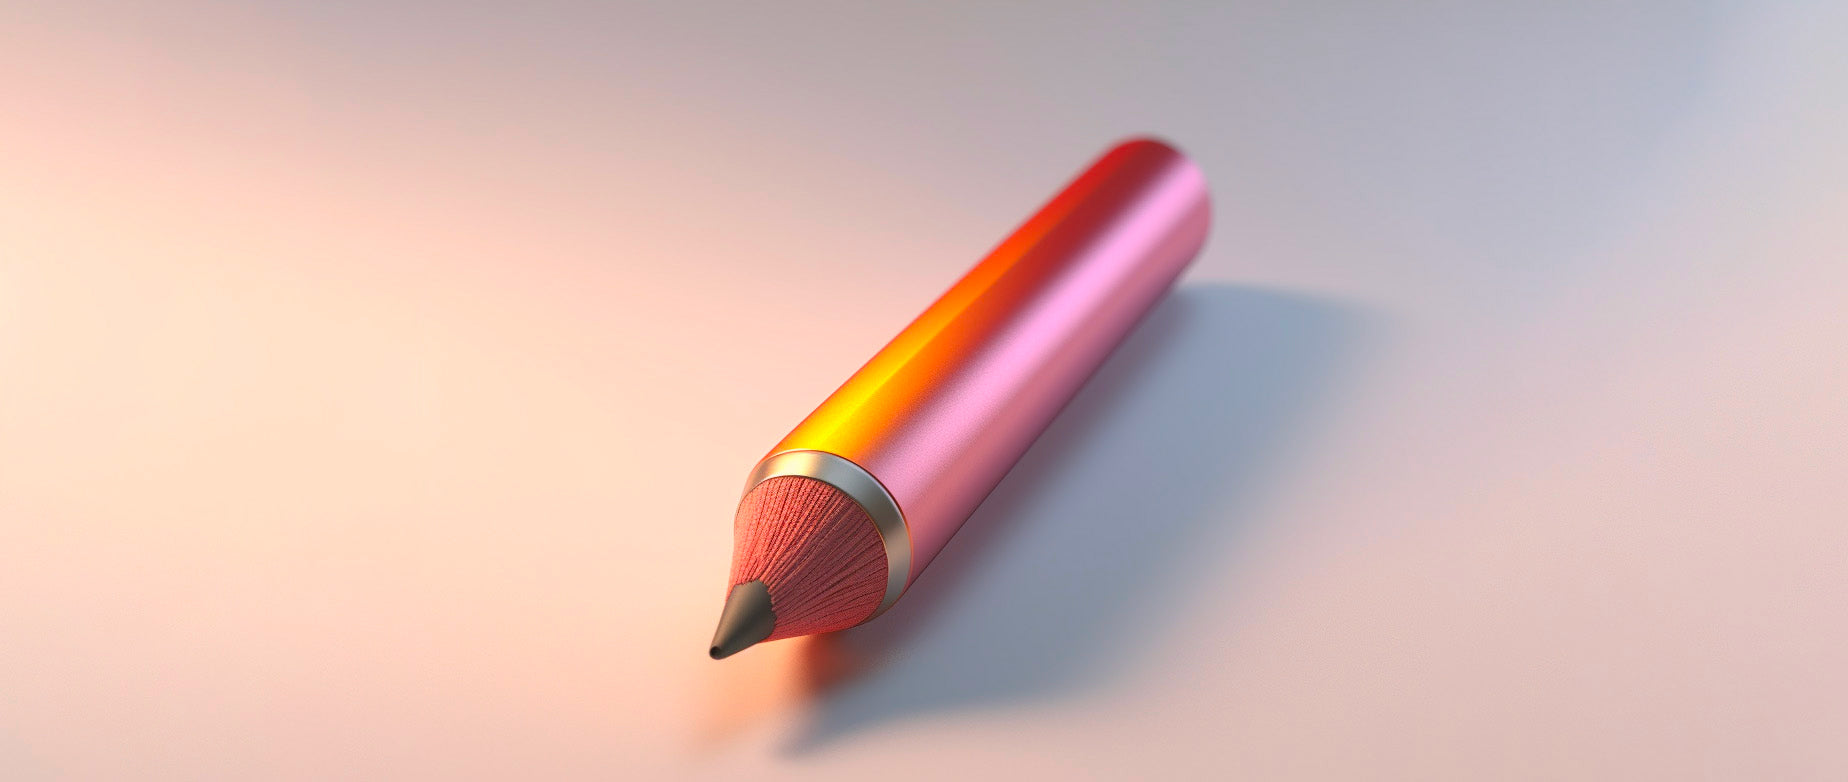 an image of a pencil: writers tone